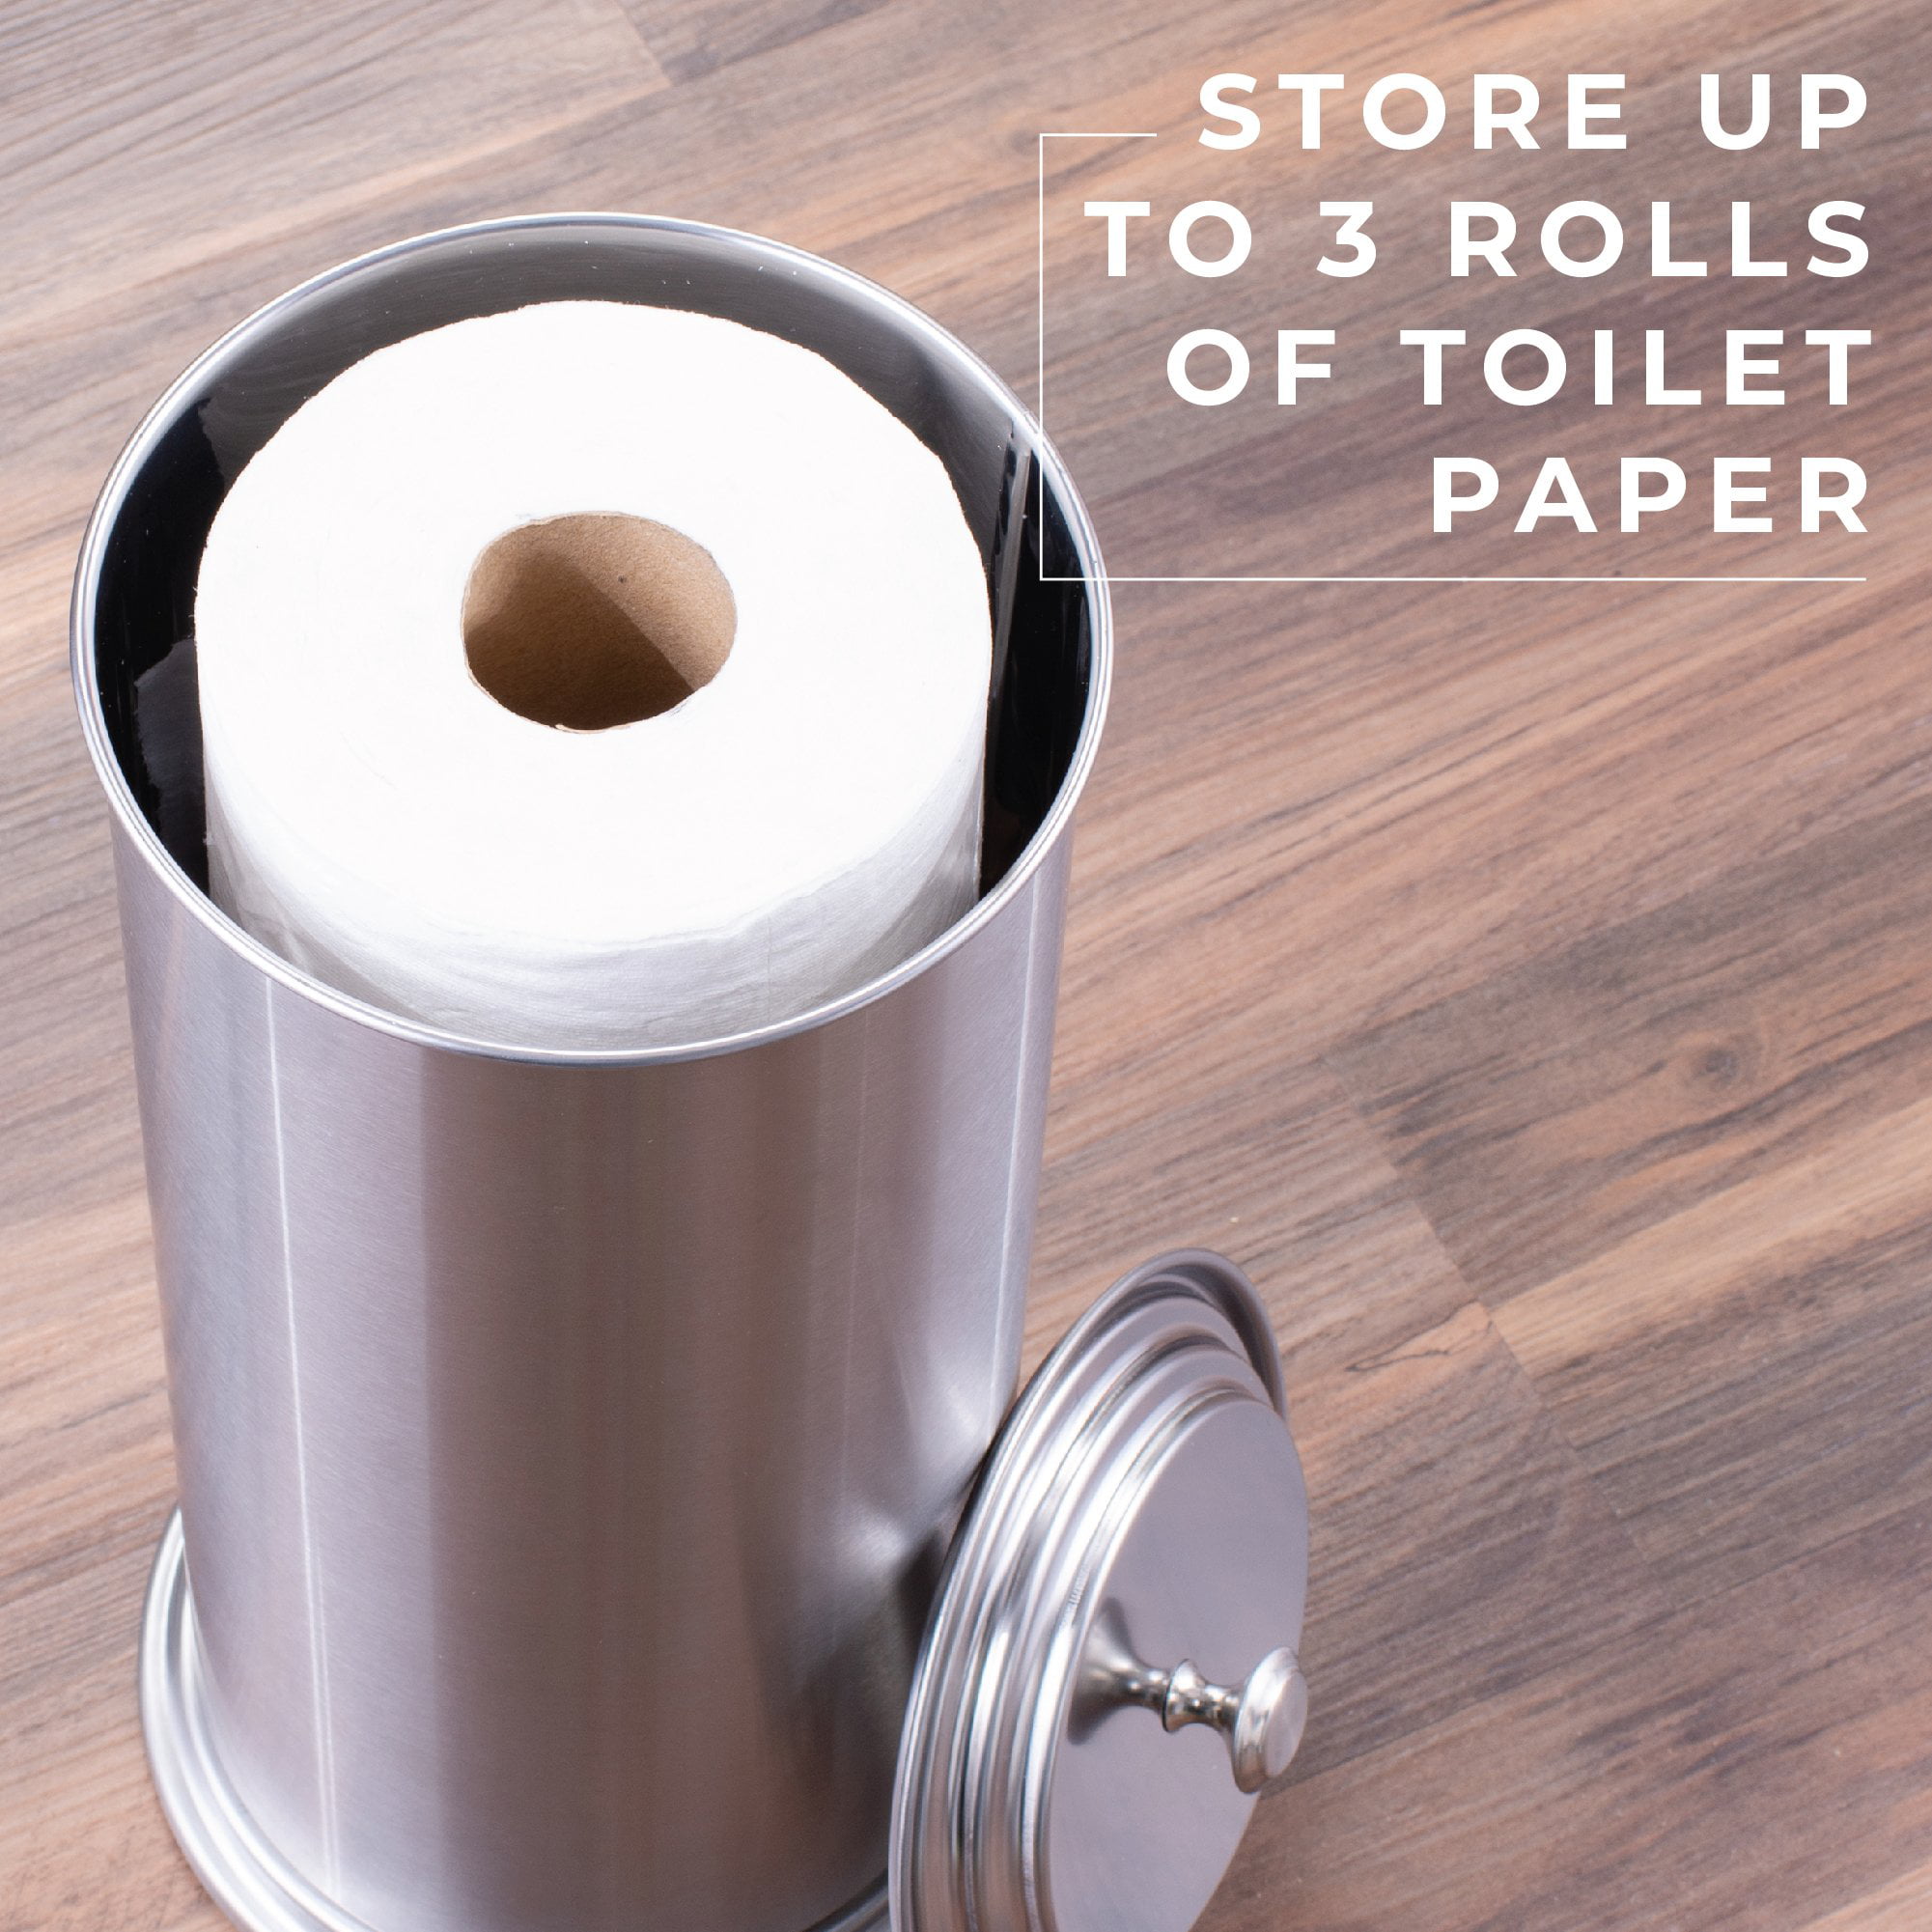 zccz Toilet Paper Holder Stand with Reserve, Free Standing Toilet Roll Stand Toilet Paper Tissue Stand Include Cell Phone Shelf, Portable Toilet Paper